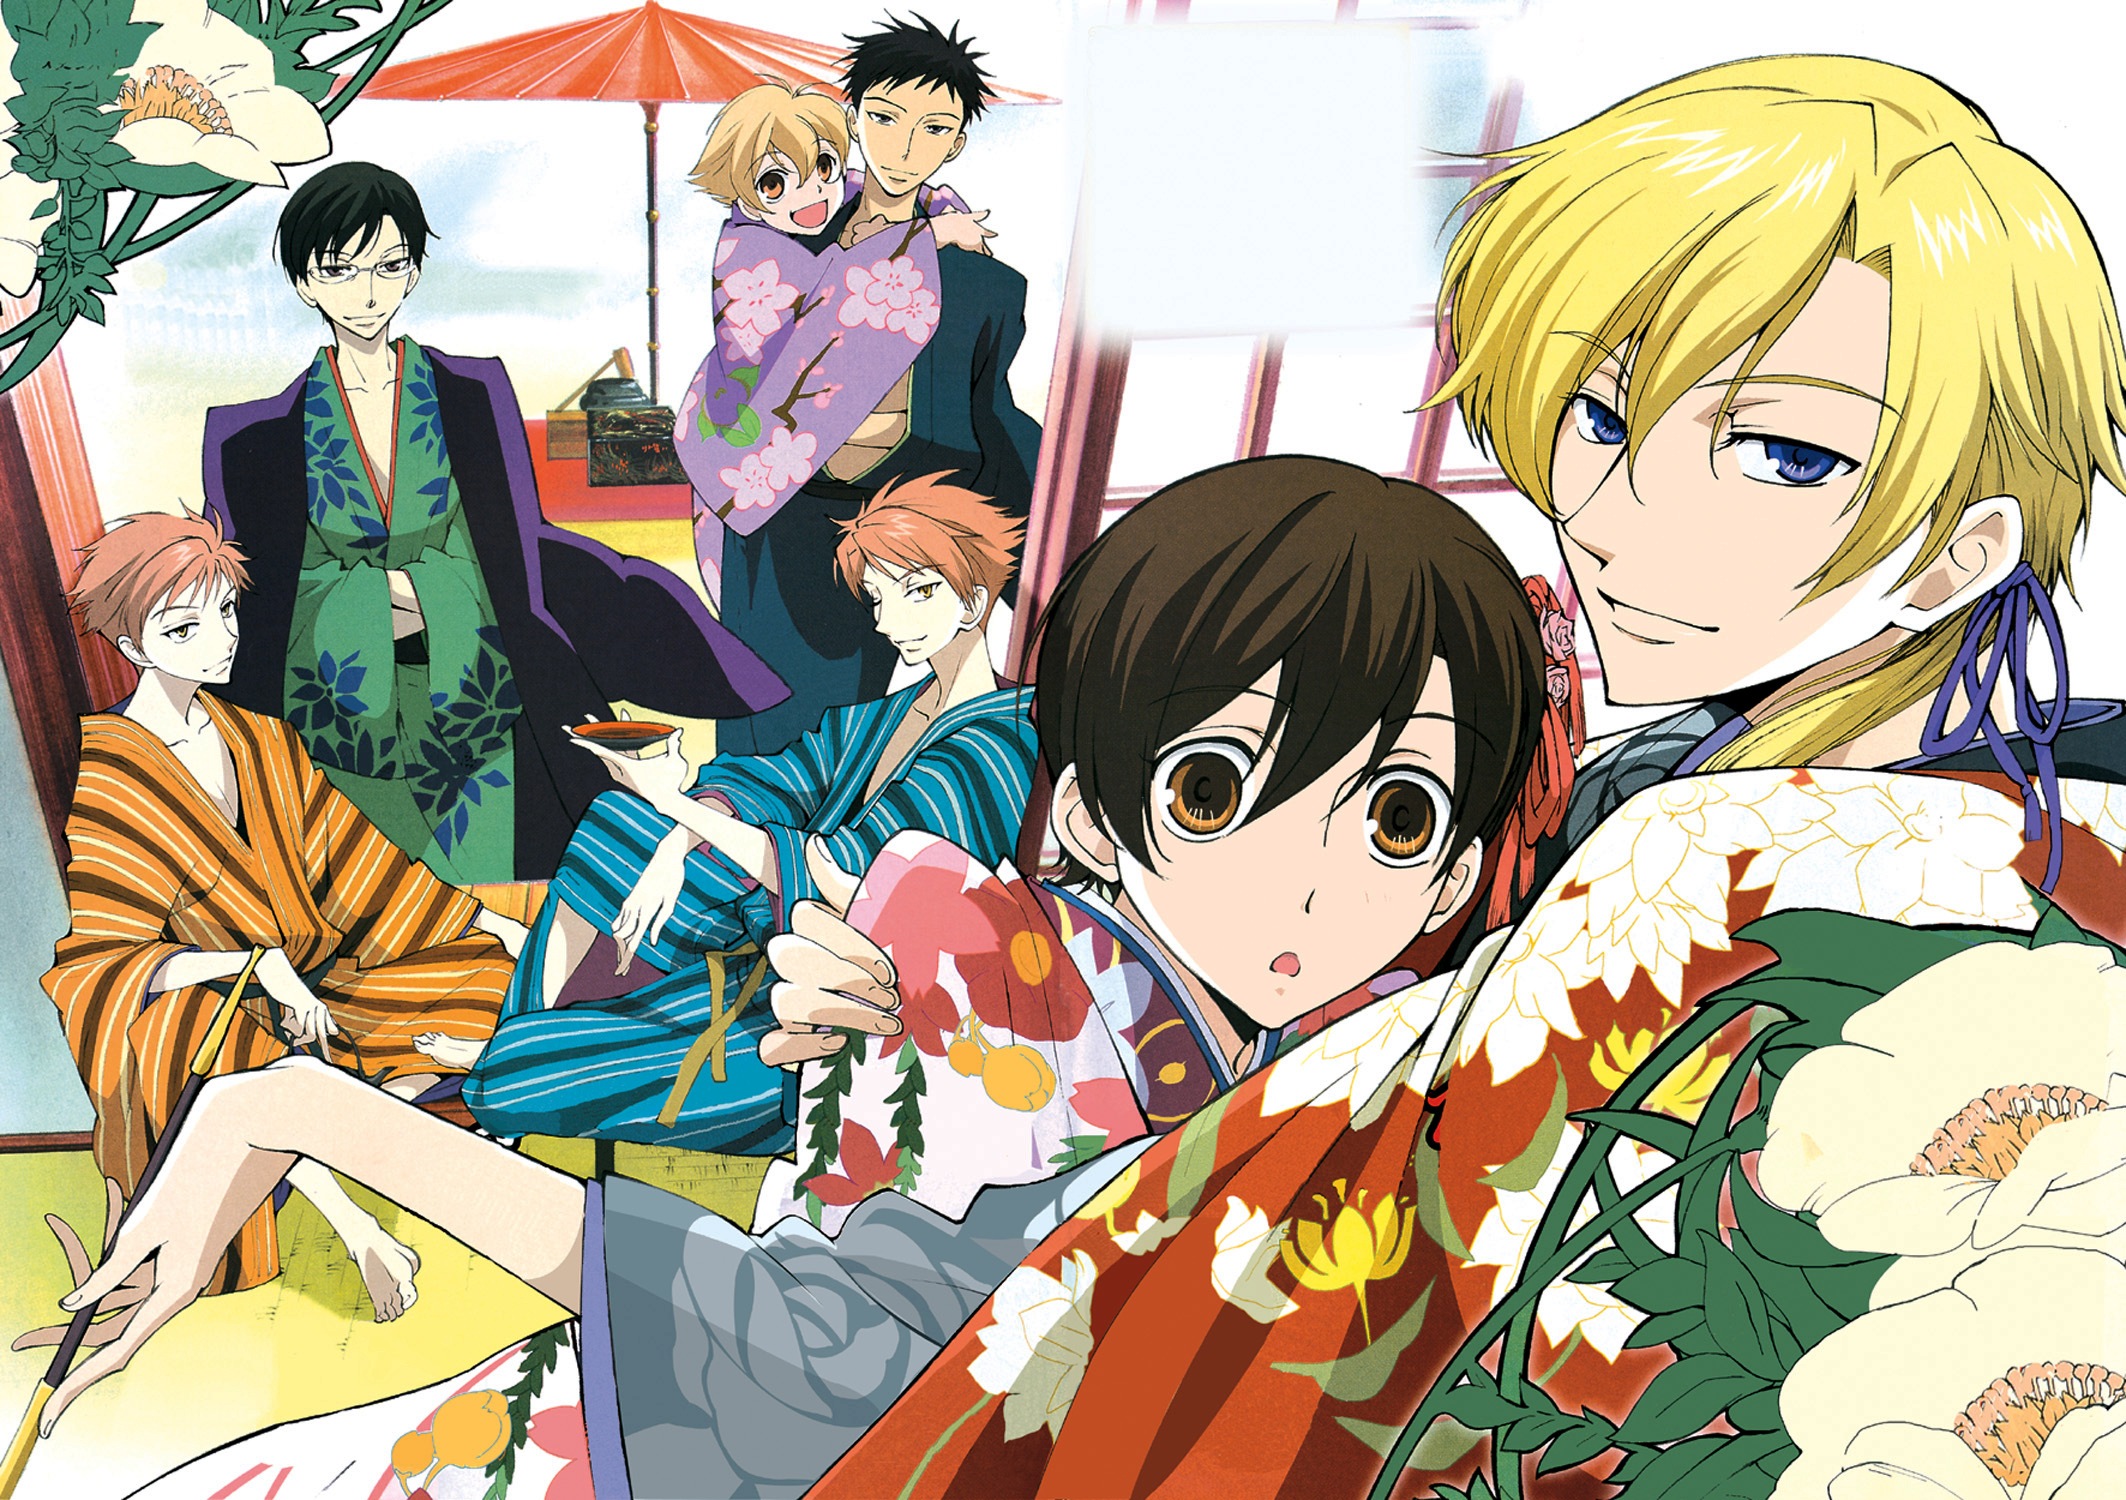 HD desktop wallpaper featuring characters from Ouran High School Host Club in stylish outfits.